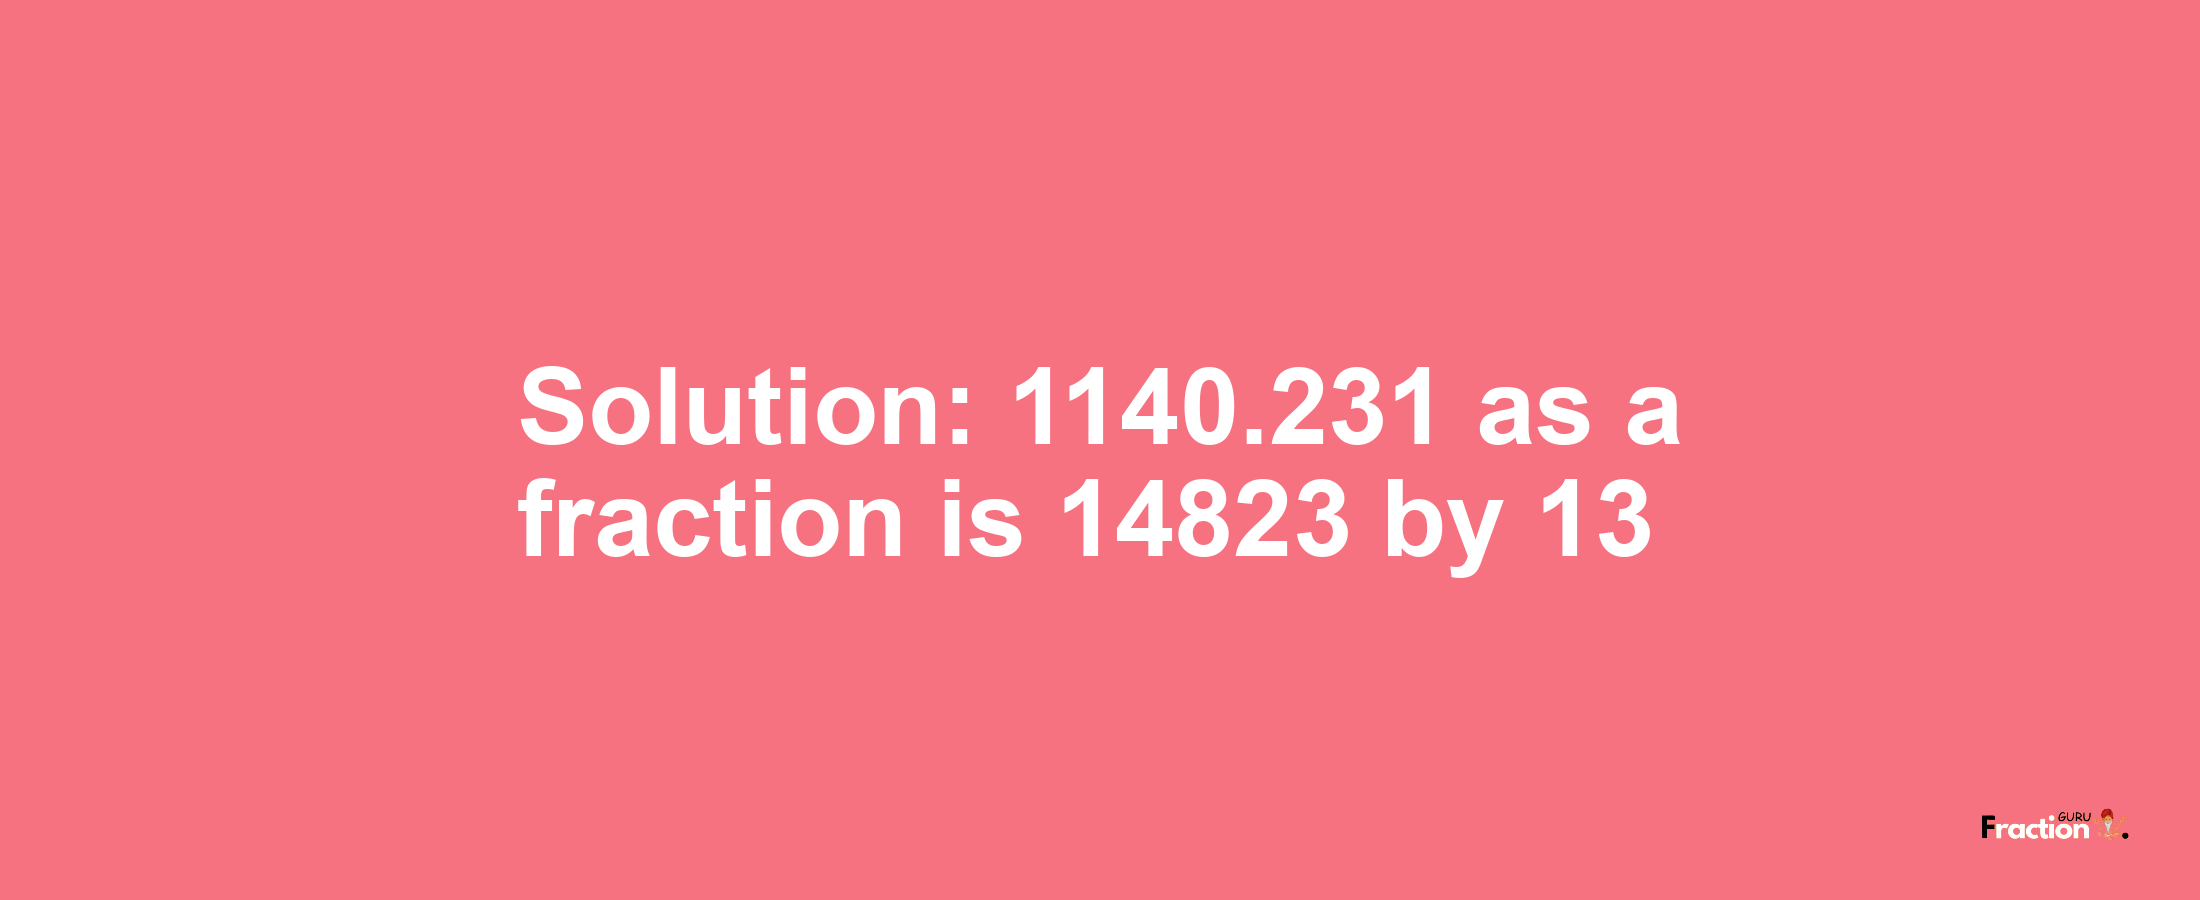 Solution:1140.231 as a fraction is 14823/13